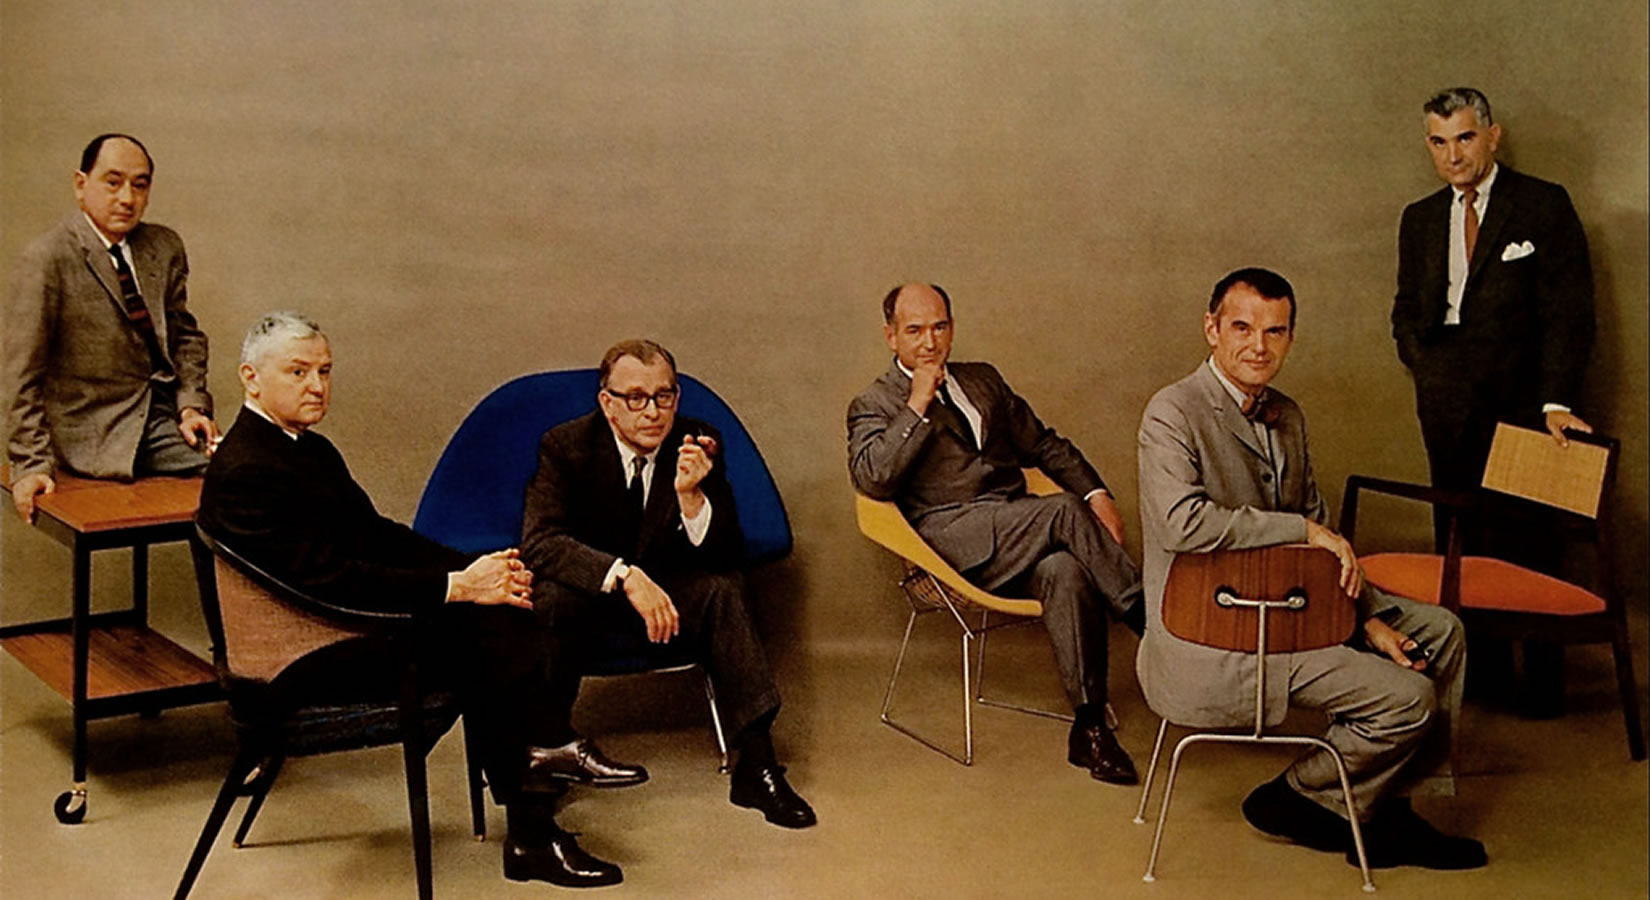 12 Things You Didn’t Know About The Eames Lounge Chair & Ottoman